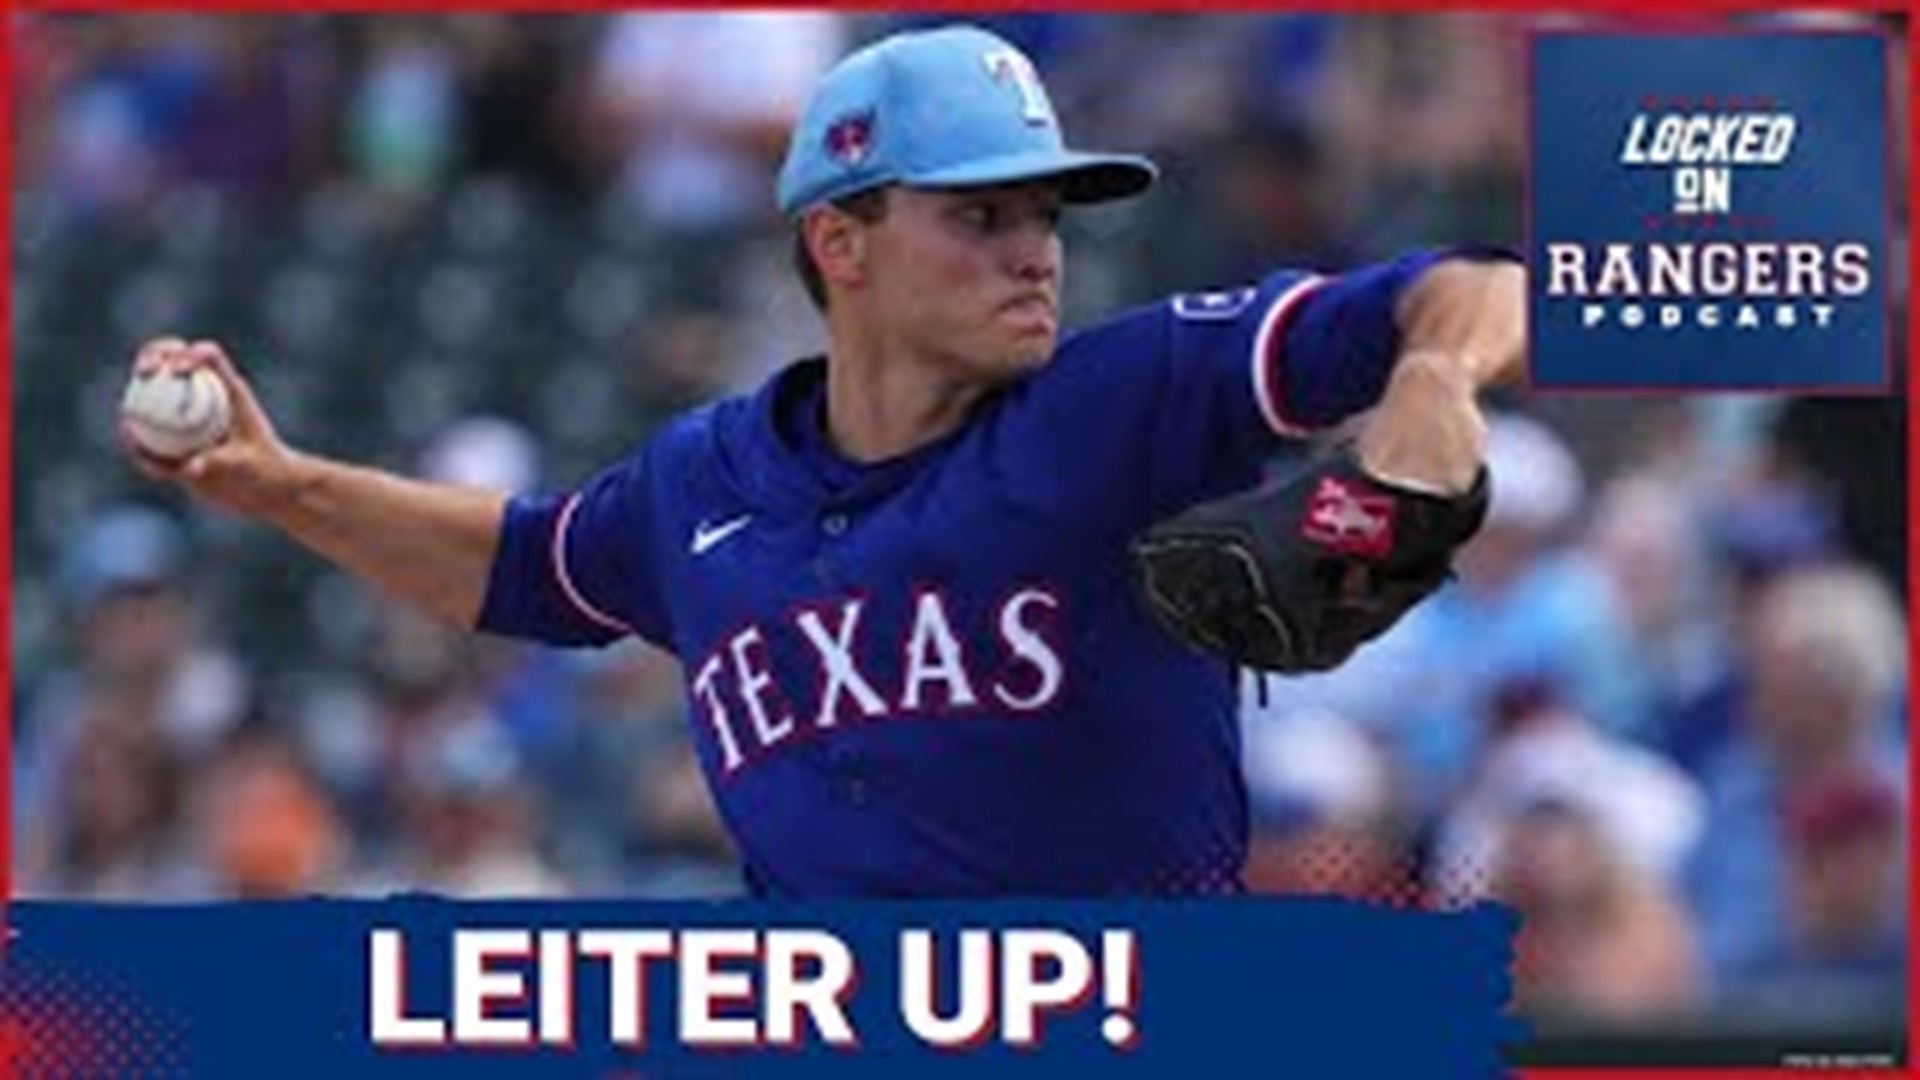 Texas Rangers first round pick Jack Leiter struggled in his first two seasons as a pro, but has looked dominant at times in AAA and will make his MLB debut.